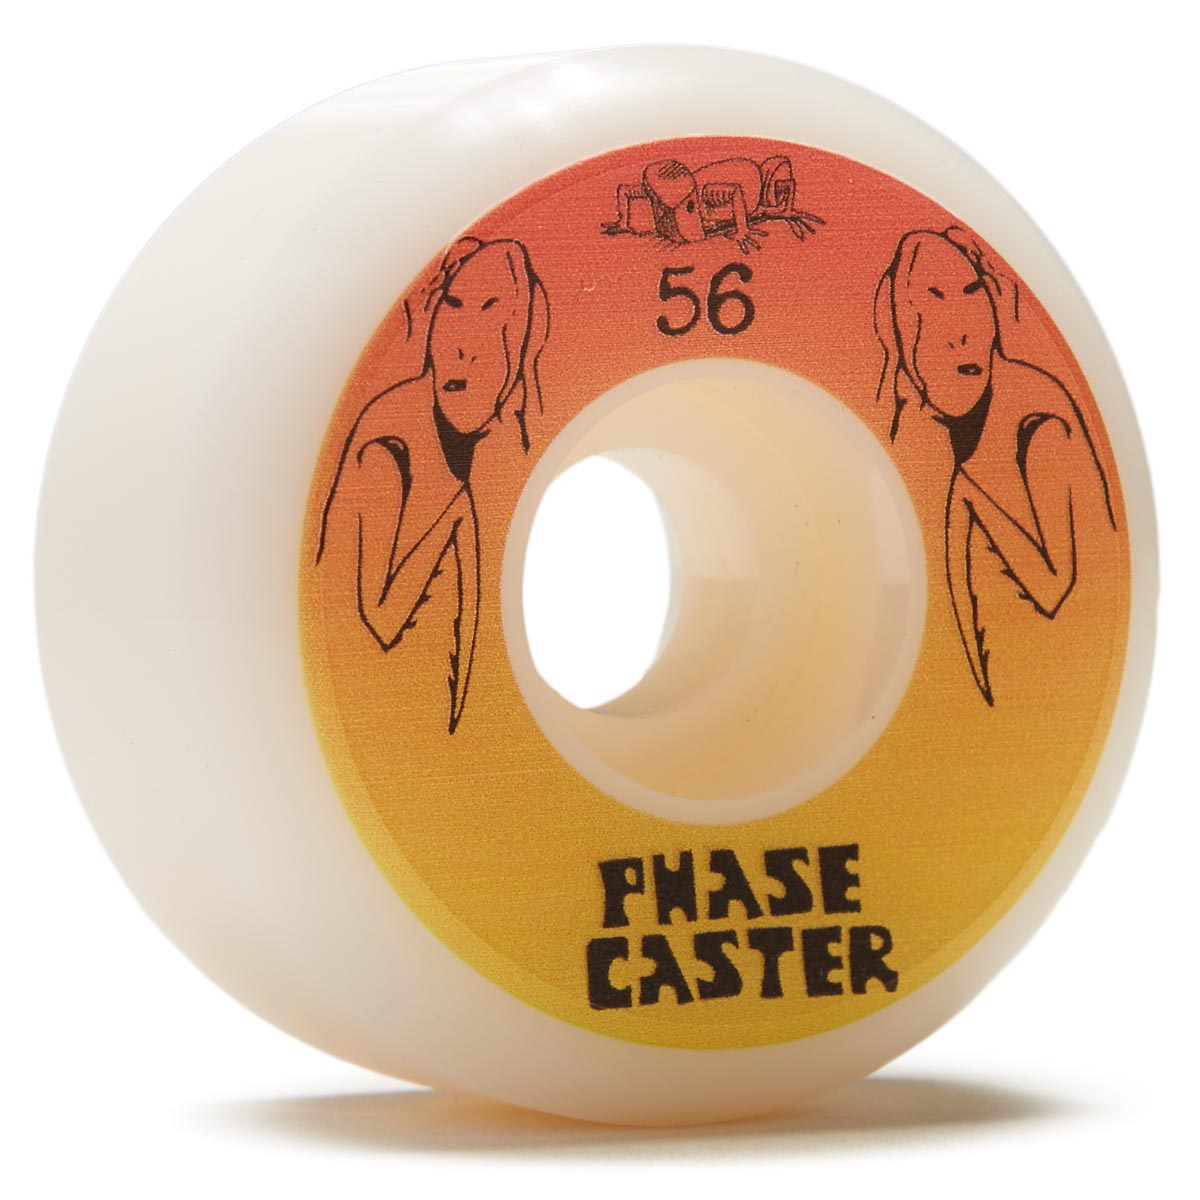 The Heated Wheel Phasecaster Mantis Man 101a Skateboard Wheels - 56mm image 1